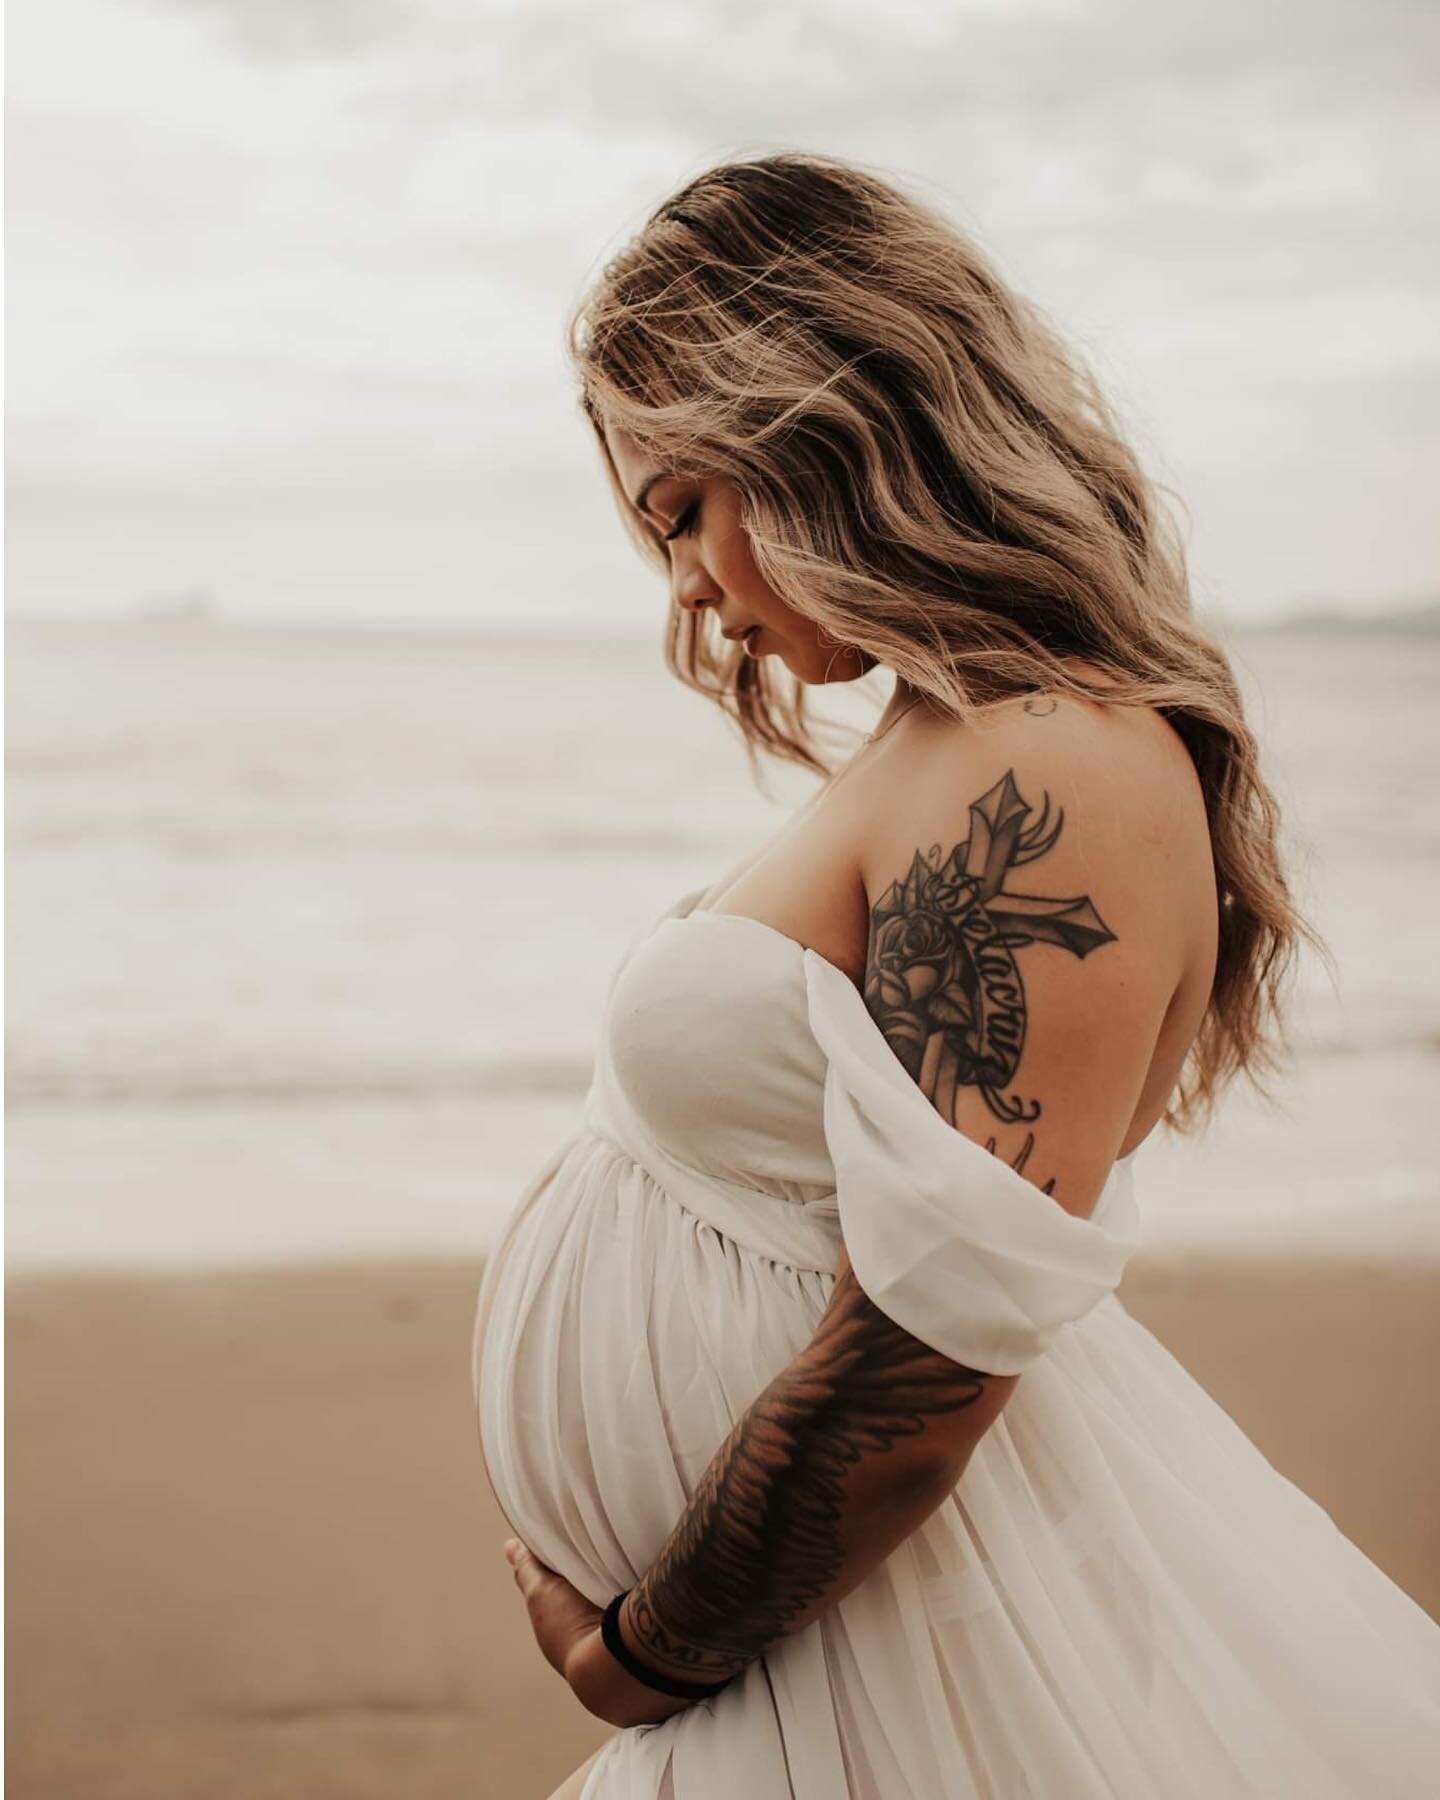 Sneak peeks from last nights maternity session💗

#maternitysession #napaphotographer #sanfranciscophotographer #lookslikefilm #maternityphotography #solanophotography #beaches